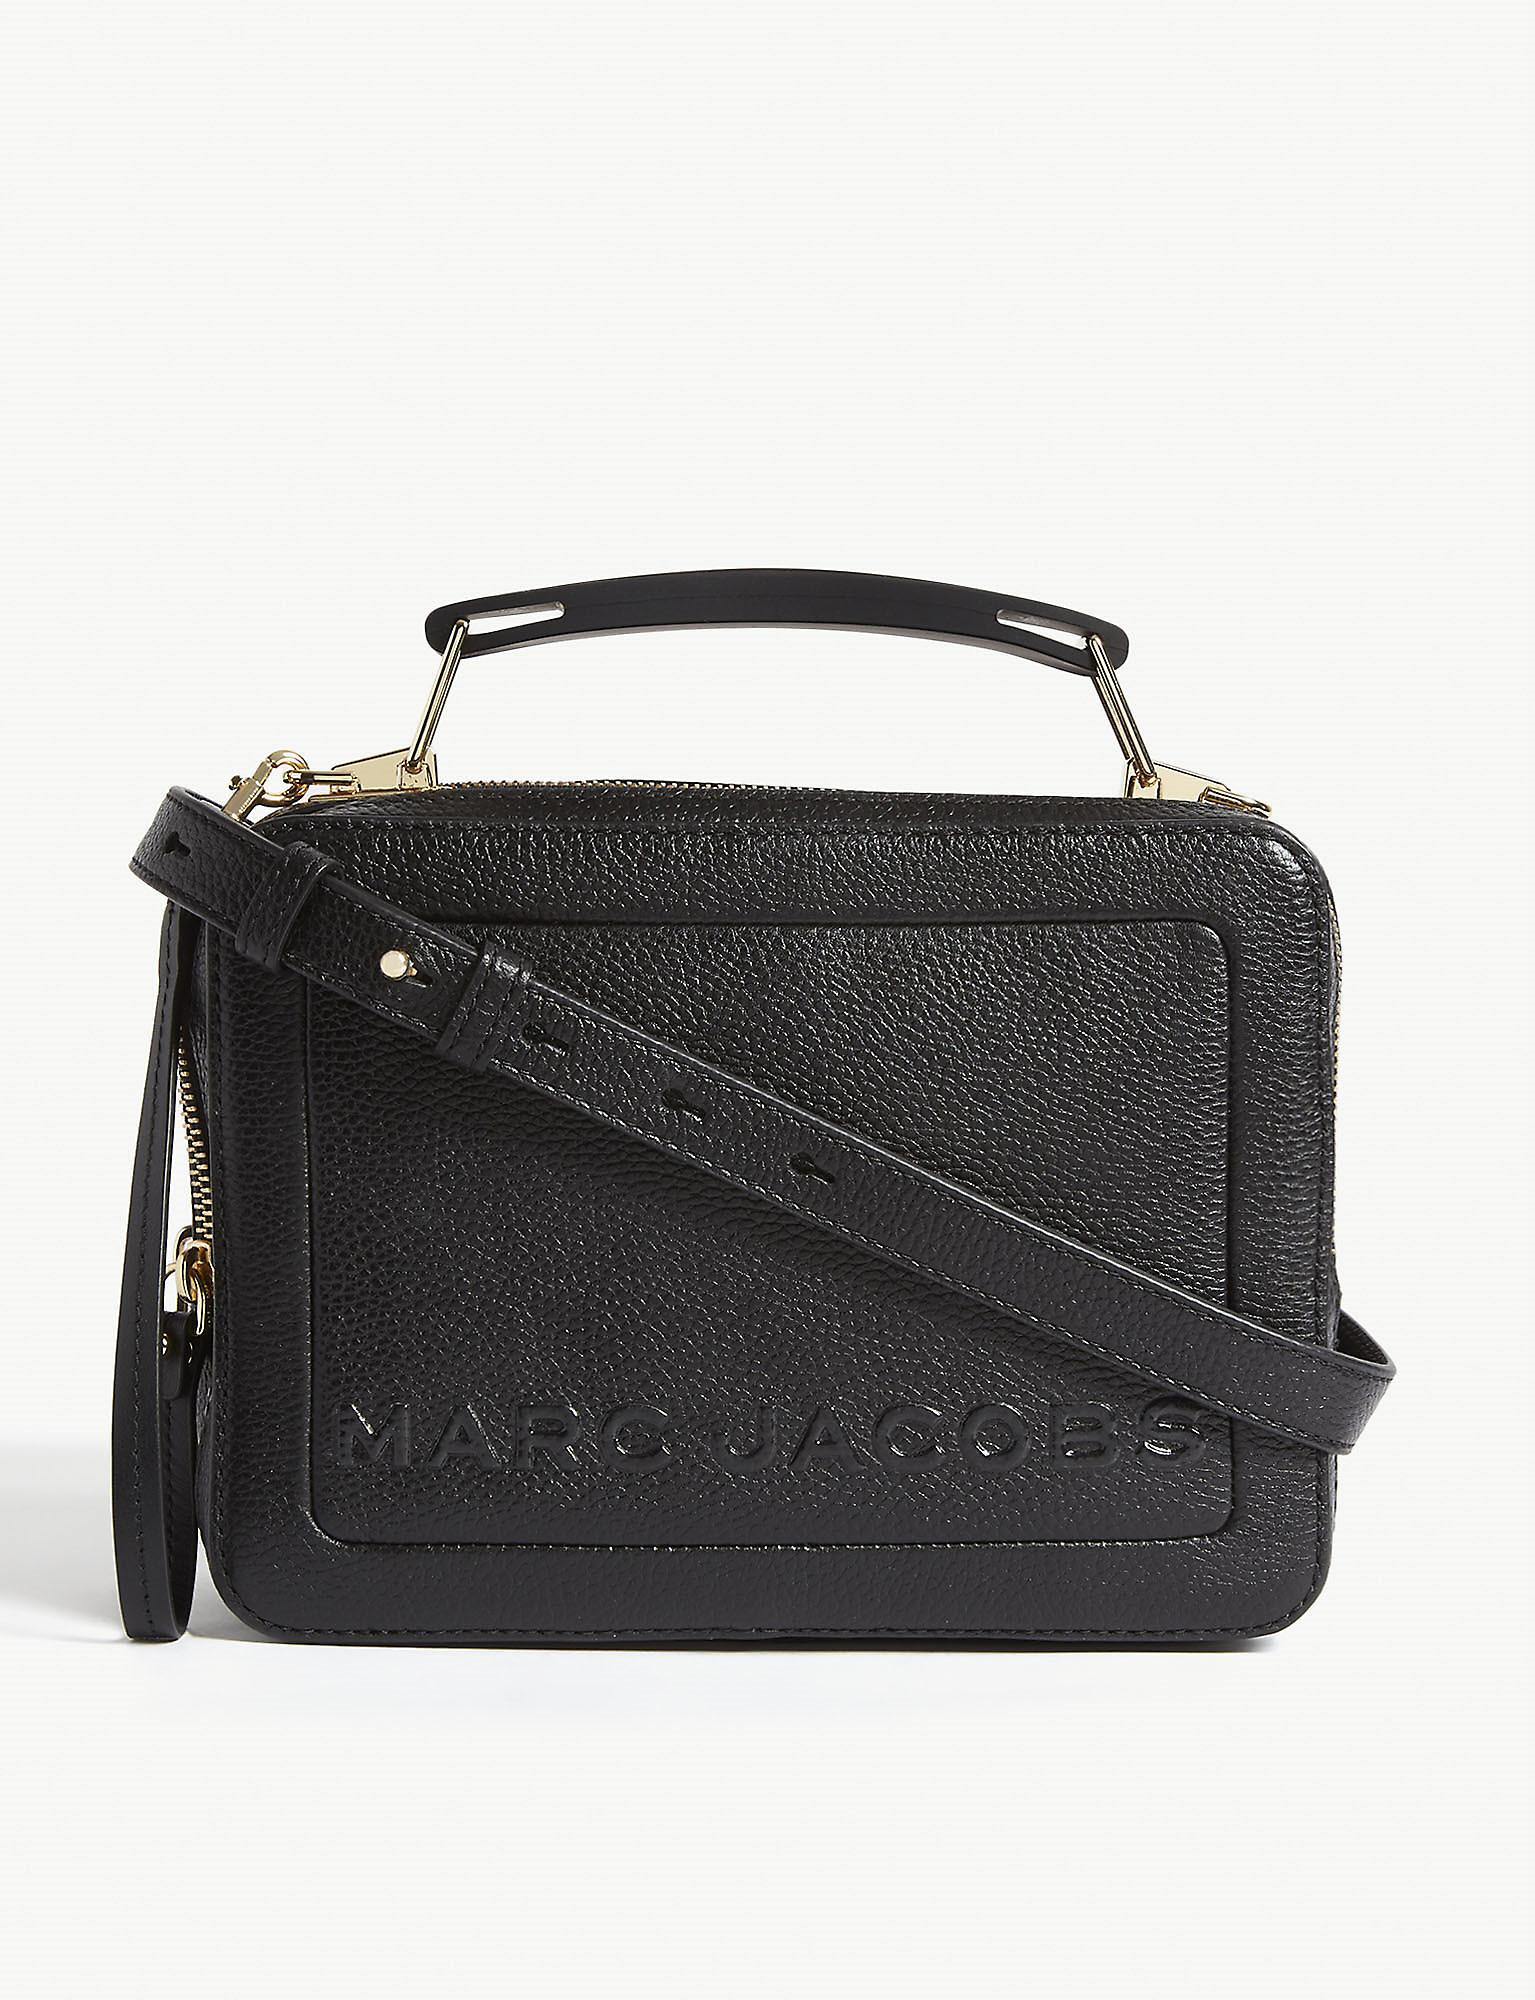 Marc Jacobs The Box Bag Leather Cross-body Bag in Black - Save 11% - Lyst